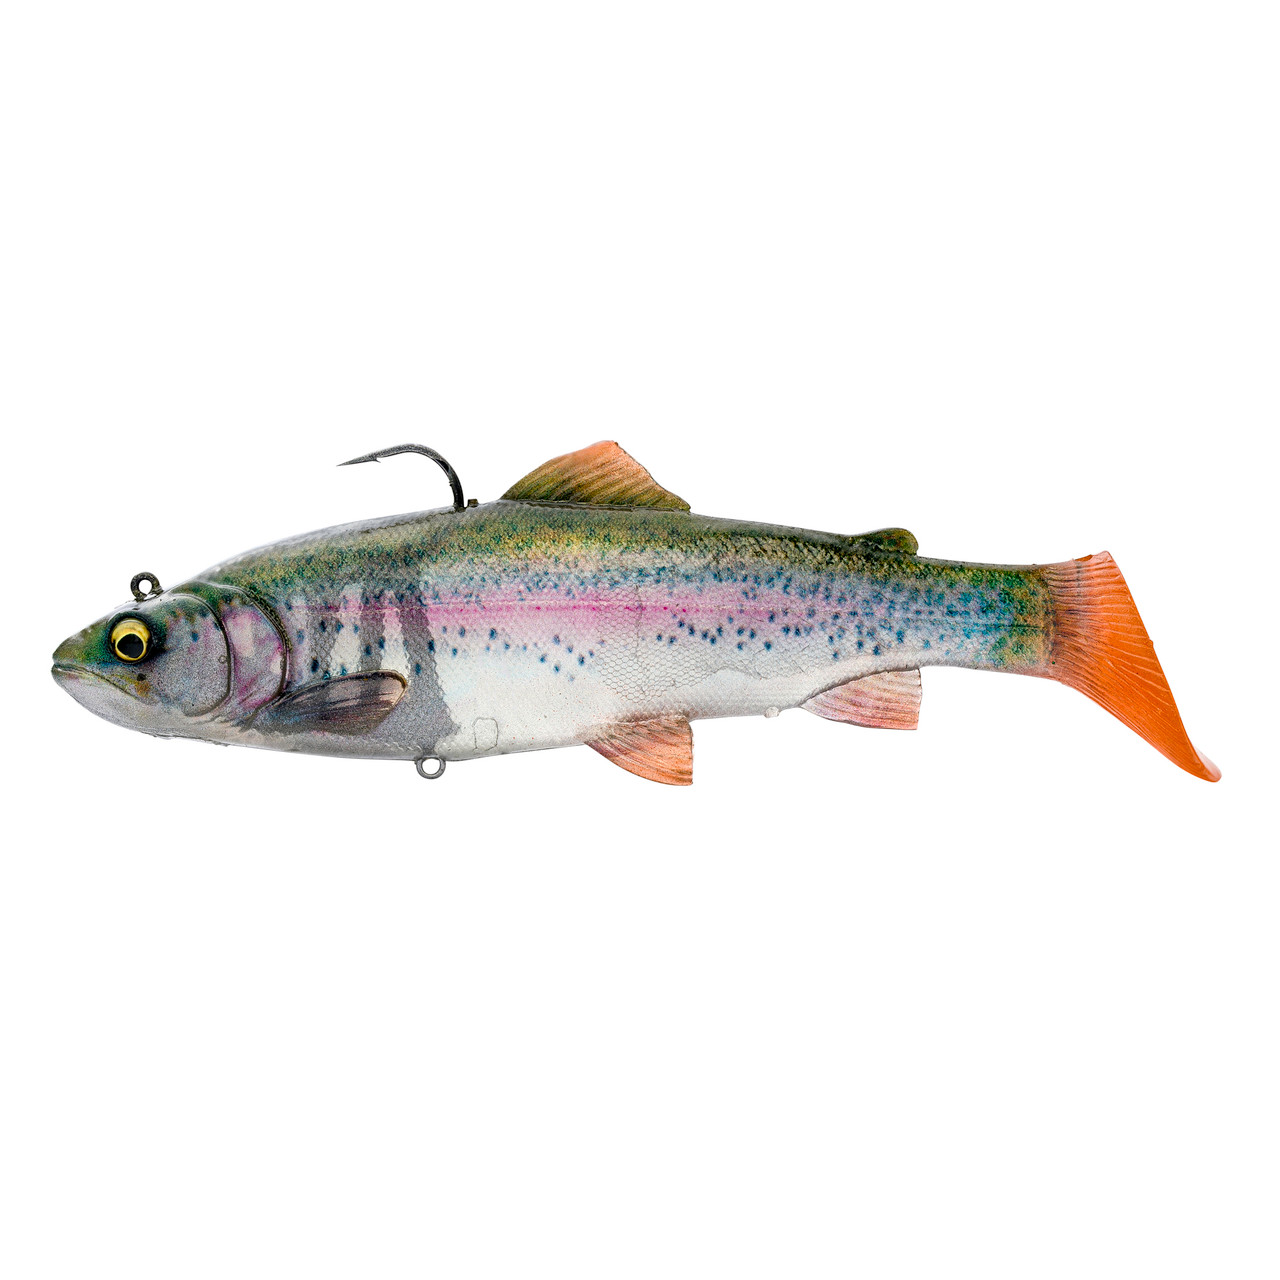 https://cdn11.bigcommerce.com/s-7ij2ioq/images/stencil/1280x1280/products/5332320/95985/Real_Trout_-_Ghost_Trout___29628.1668089497.jpg?c=2